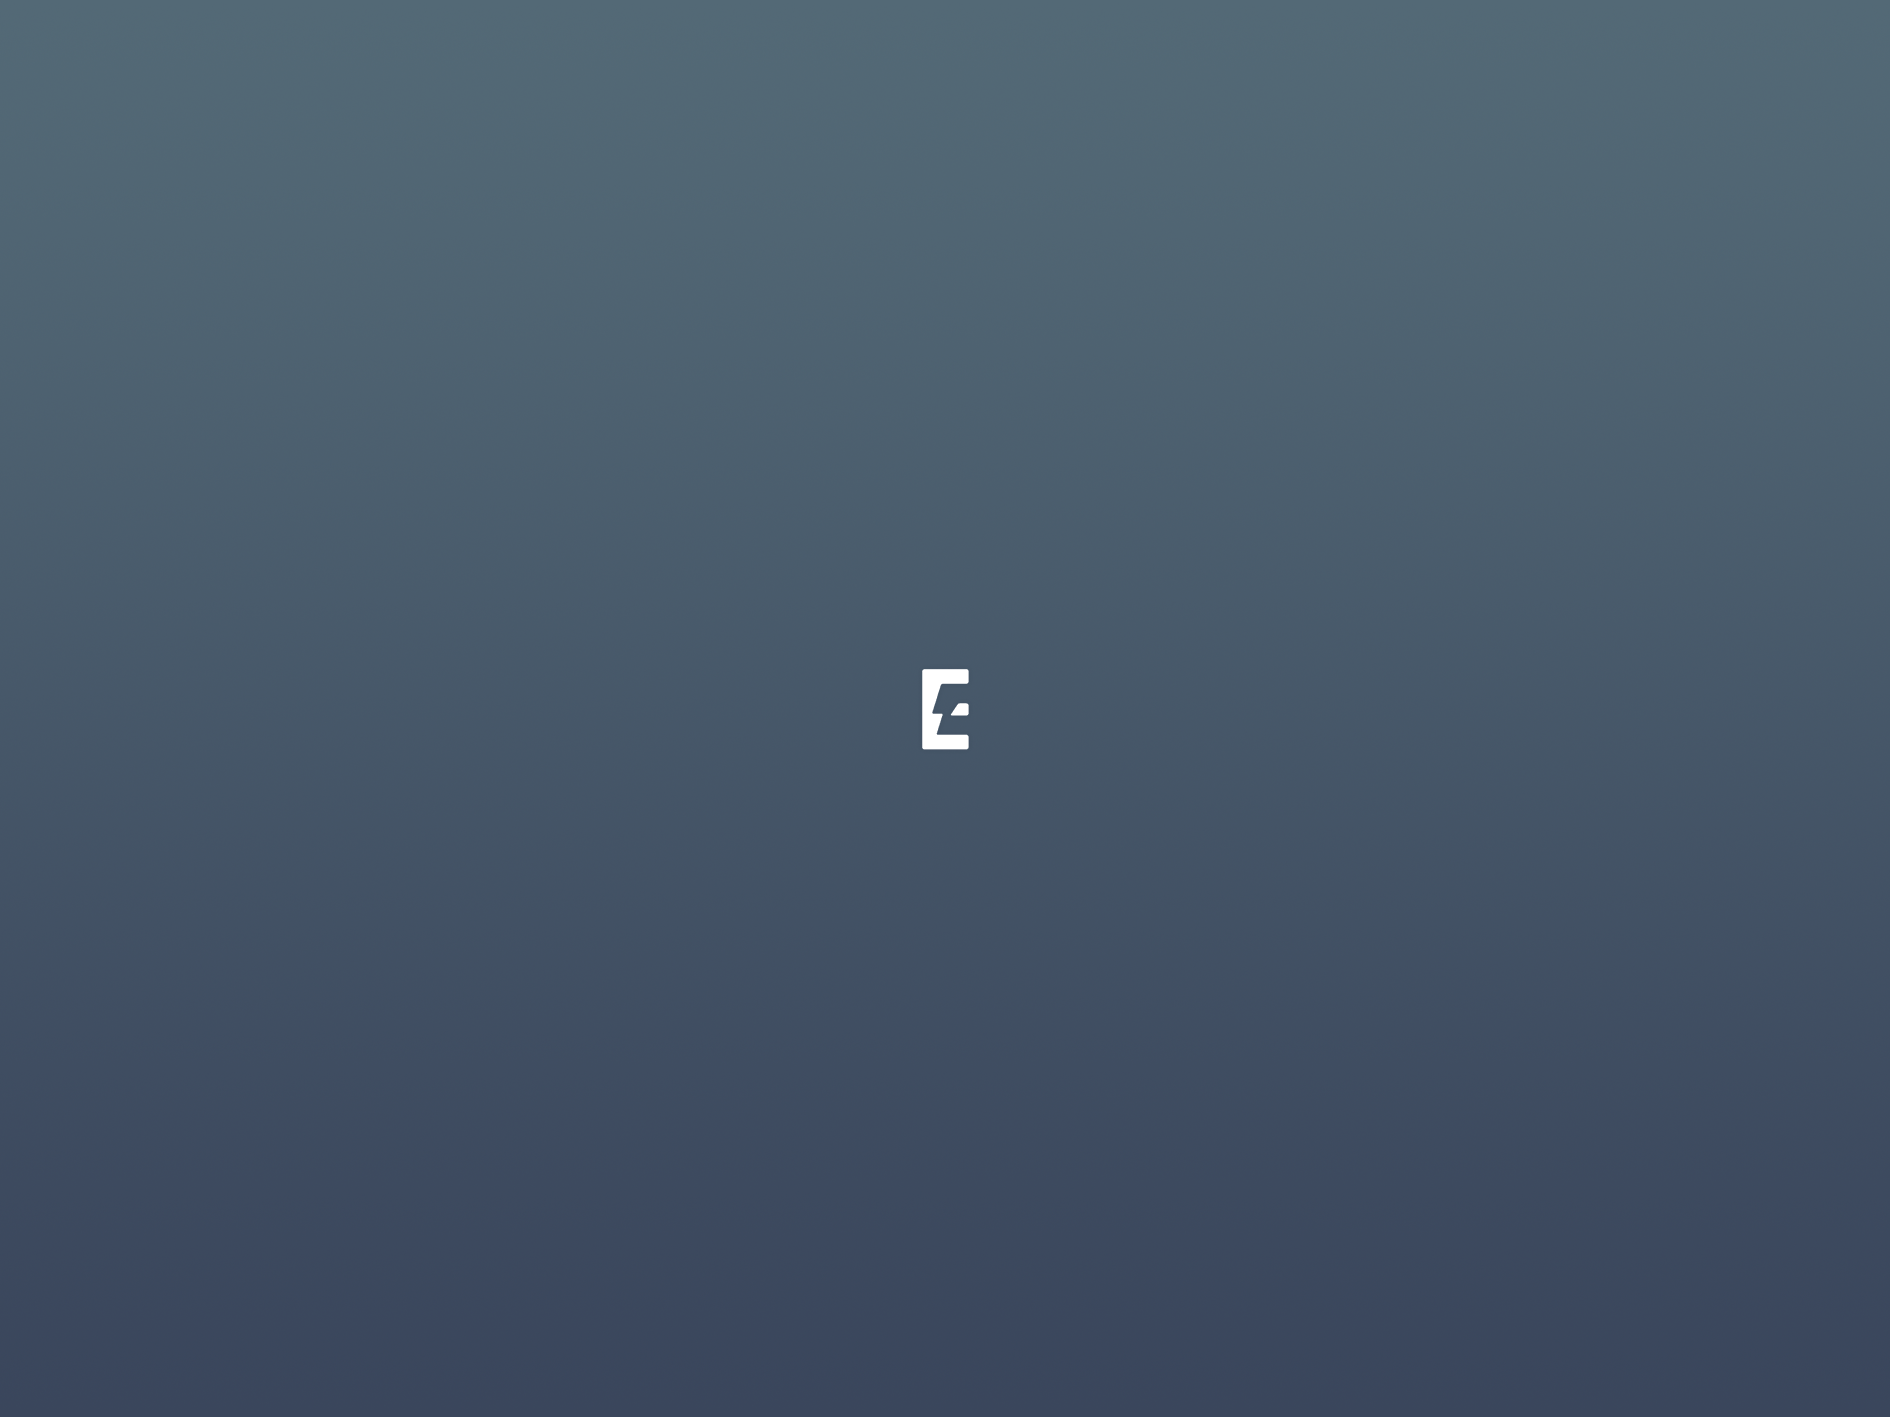 Jailbreak Logo - Discussion] I made an Electra wallpaper. WITH THE NEW LOGO! : jailbreak